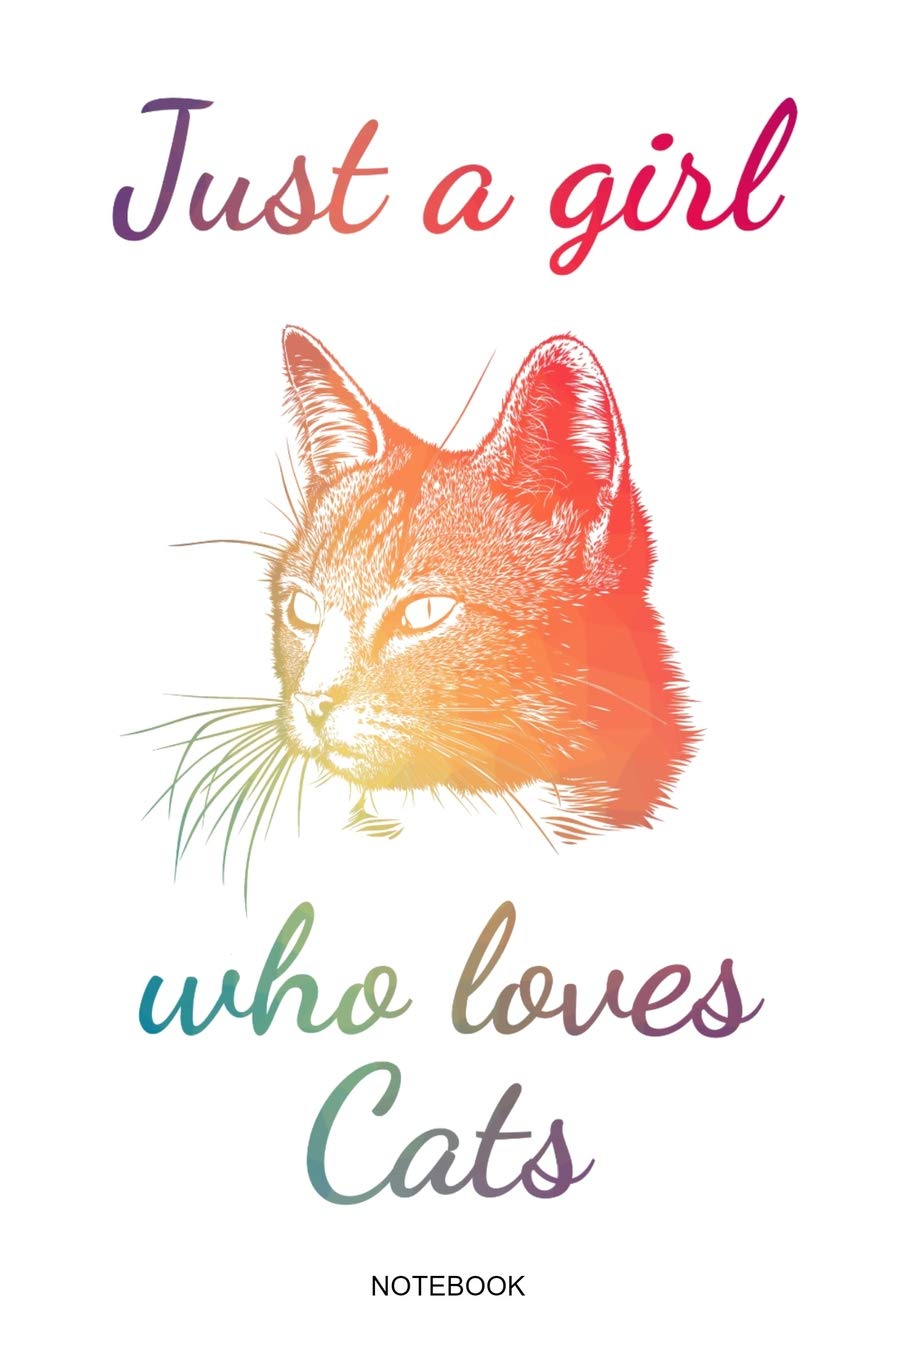 Just A Girl Who Loves Cats: Cat Lover Notebook Cute Animal Lover Gift Kids Meow Cat Lady Mom Present Pet Kitten Veterinarian Girlfriend I Size 6 x 9 I. Booklet Diary